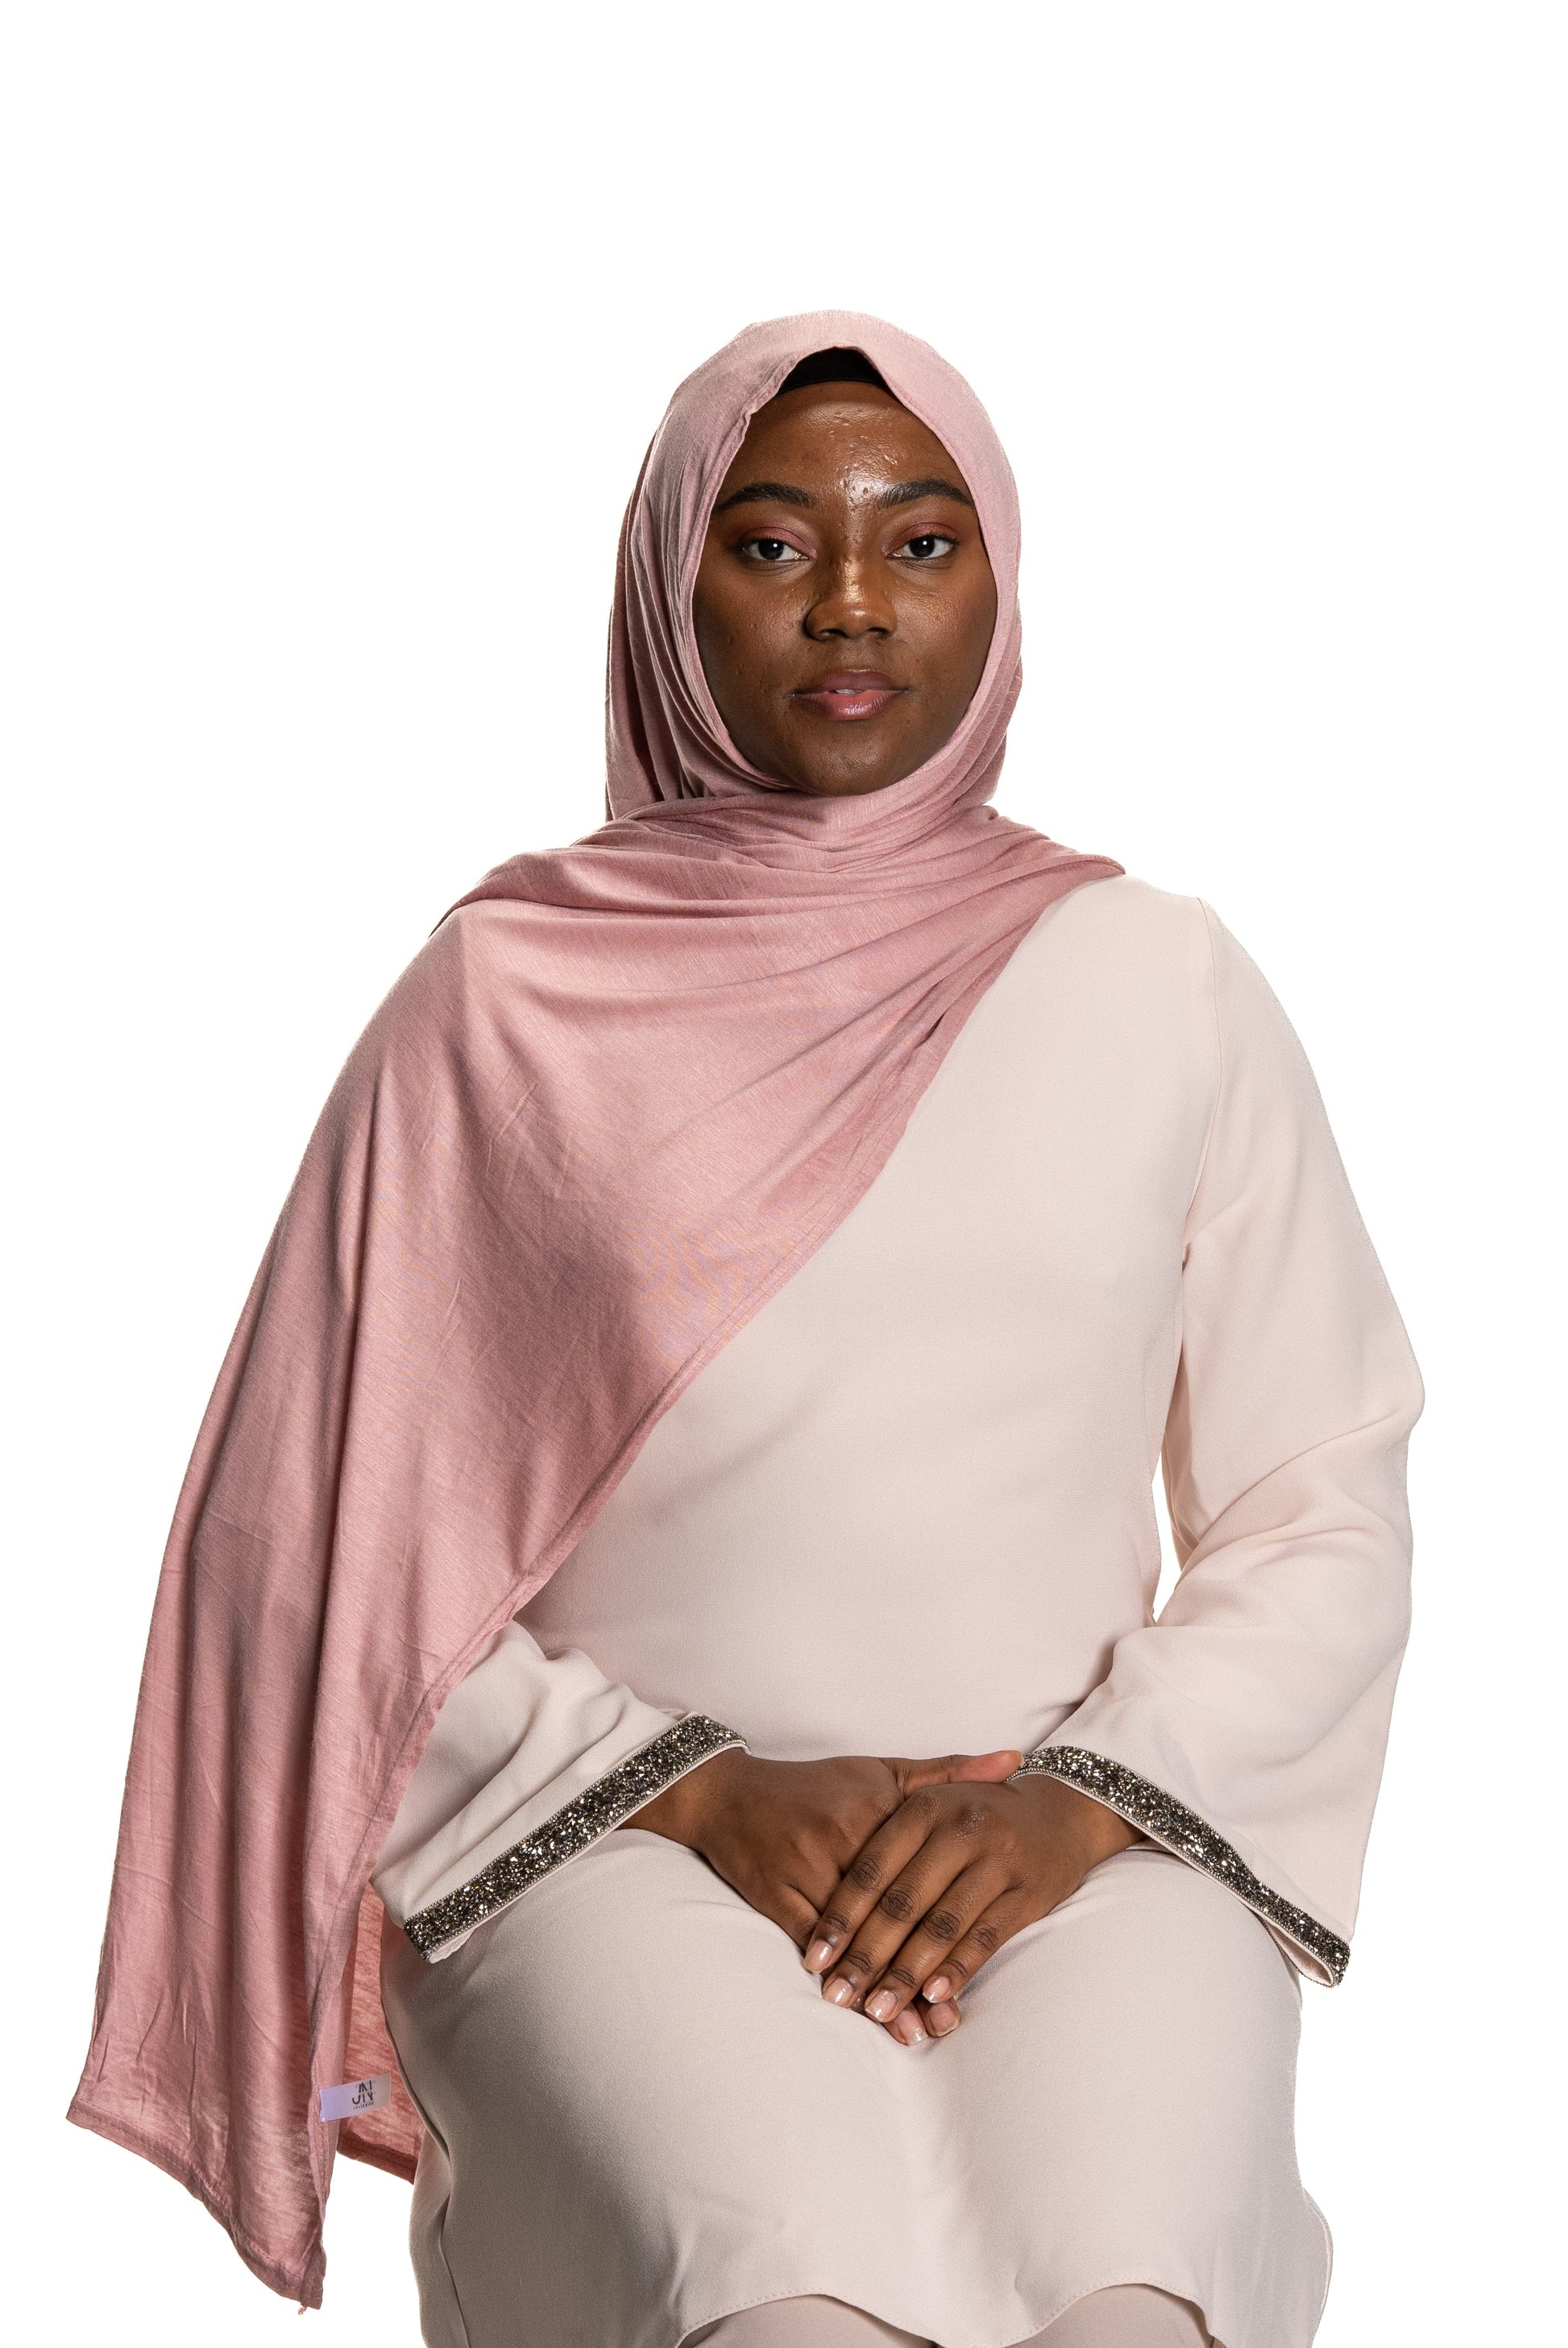 Jolie Nisa Hijab Rosewater Premium Slip-on Jersey Instant Head Scarf Wrap for Effortless and Stylish Hijab Wear Premium Slip-on instant Jersey Head Scarf Wrap for Effortless and Stylish Hijab Wear!